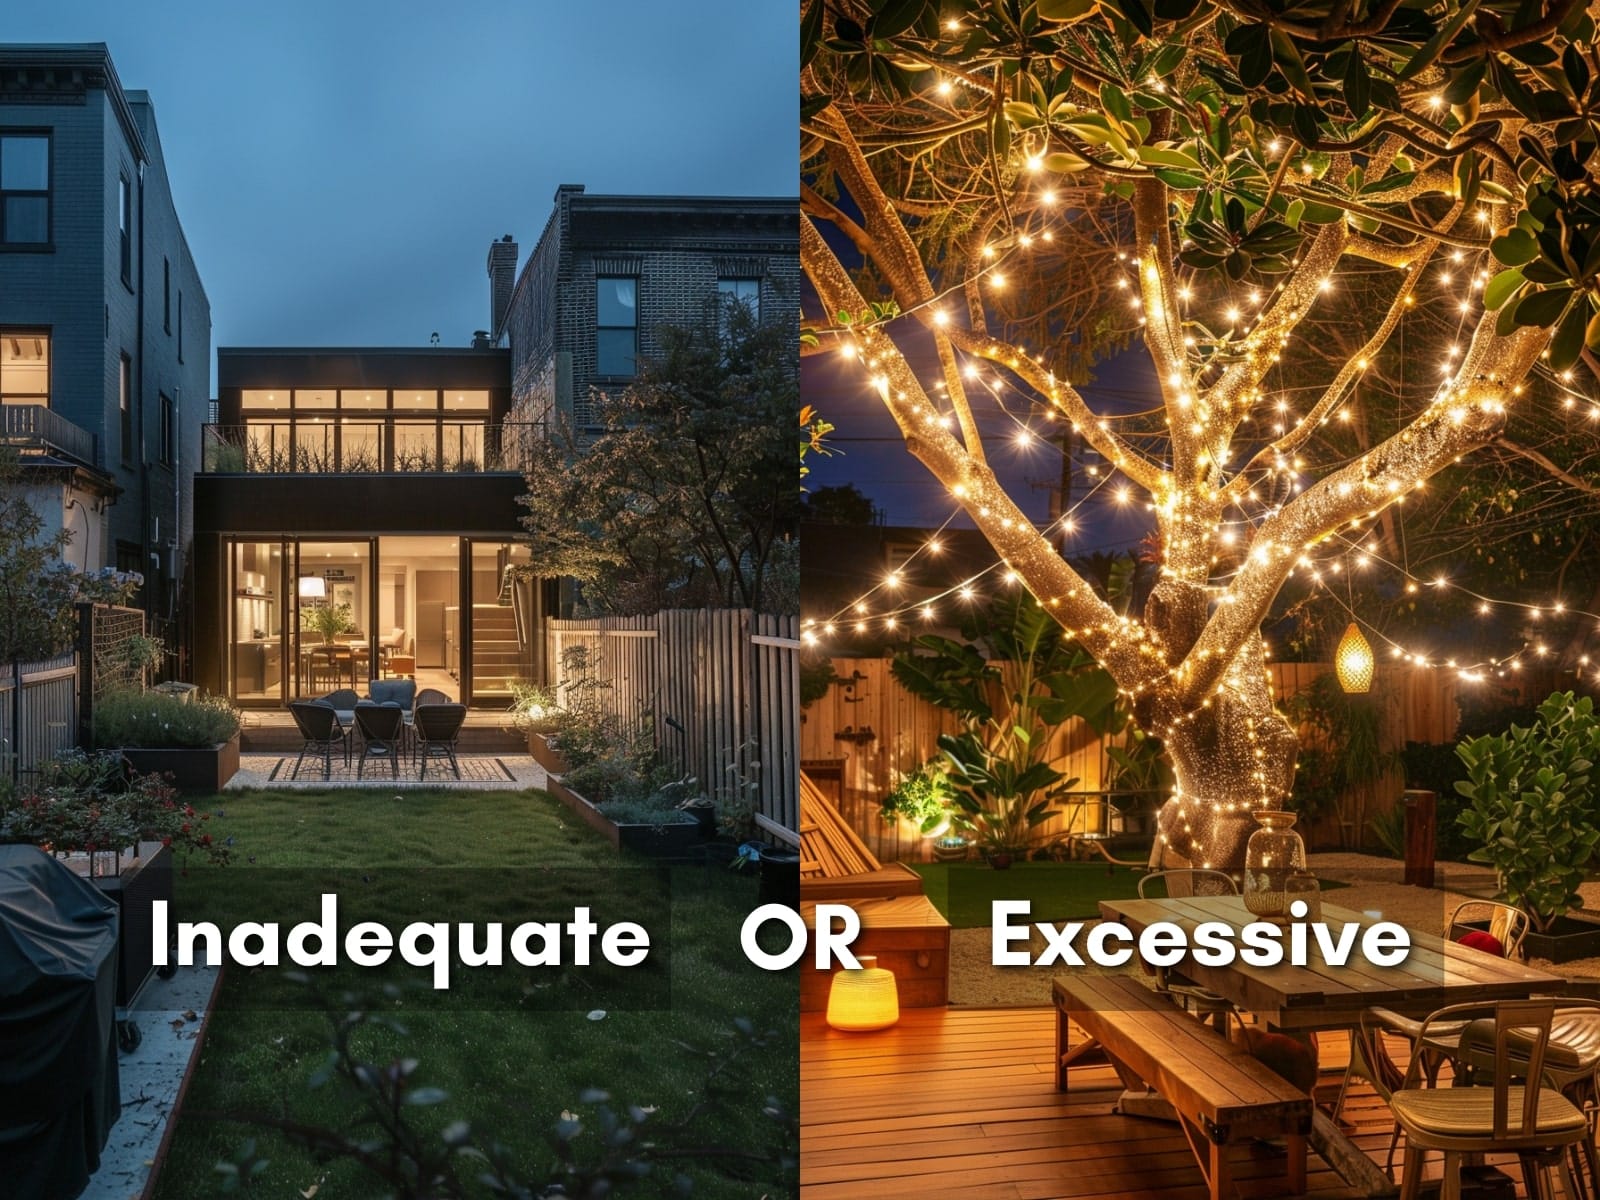 Comparison of inadequate and excessive outdoor lighting